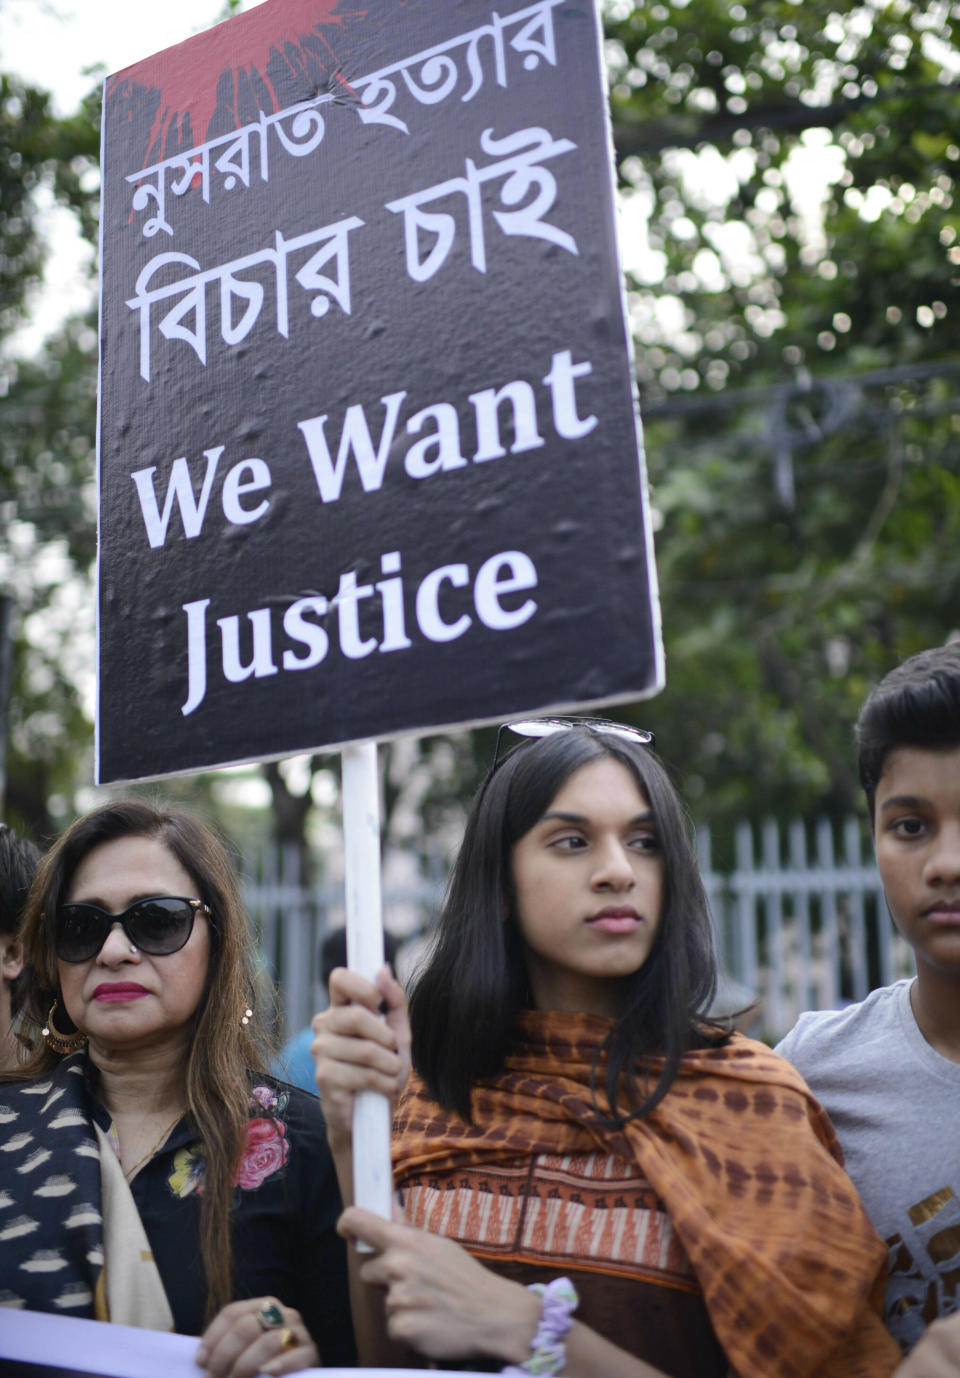 Protesters hold placards and gather to demand justice for an 18-year-old woman who was killed after she was set on fire for refusing to drop sexual harassment charges against her Islamic school's principal, in Dhaka, Bangladesh, Friday, April 19, 2019. Nusrat Jahan Rafi told her family she was lured to the roof of her rural school in the town of Feni on April 6 and asked to withdraw the charges by five people clad in burqas. When she refused, she said her hands were tied and she was doused in kerosene and set alight. Rafi told the story to her brother in an ambulance on the way to the hospital and he recorded her testimony on his mobile phone. She died four days later in a Dhaka hospital with burns covering 80% of her body. (AP Photo/Mahmud Hossain Opu)